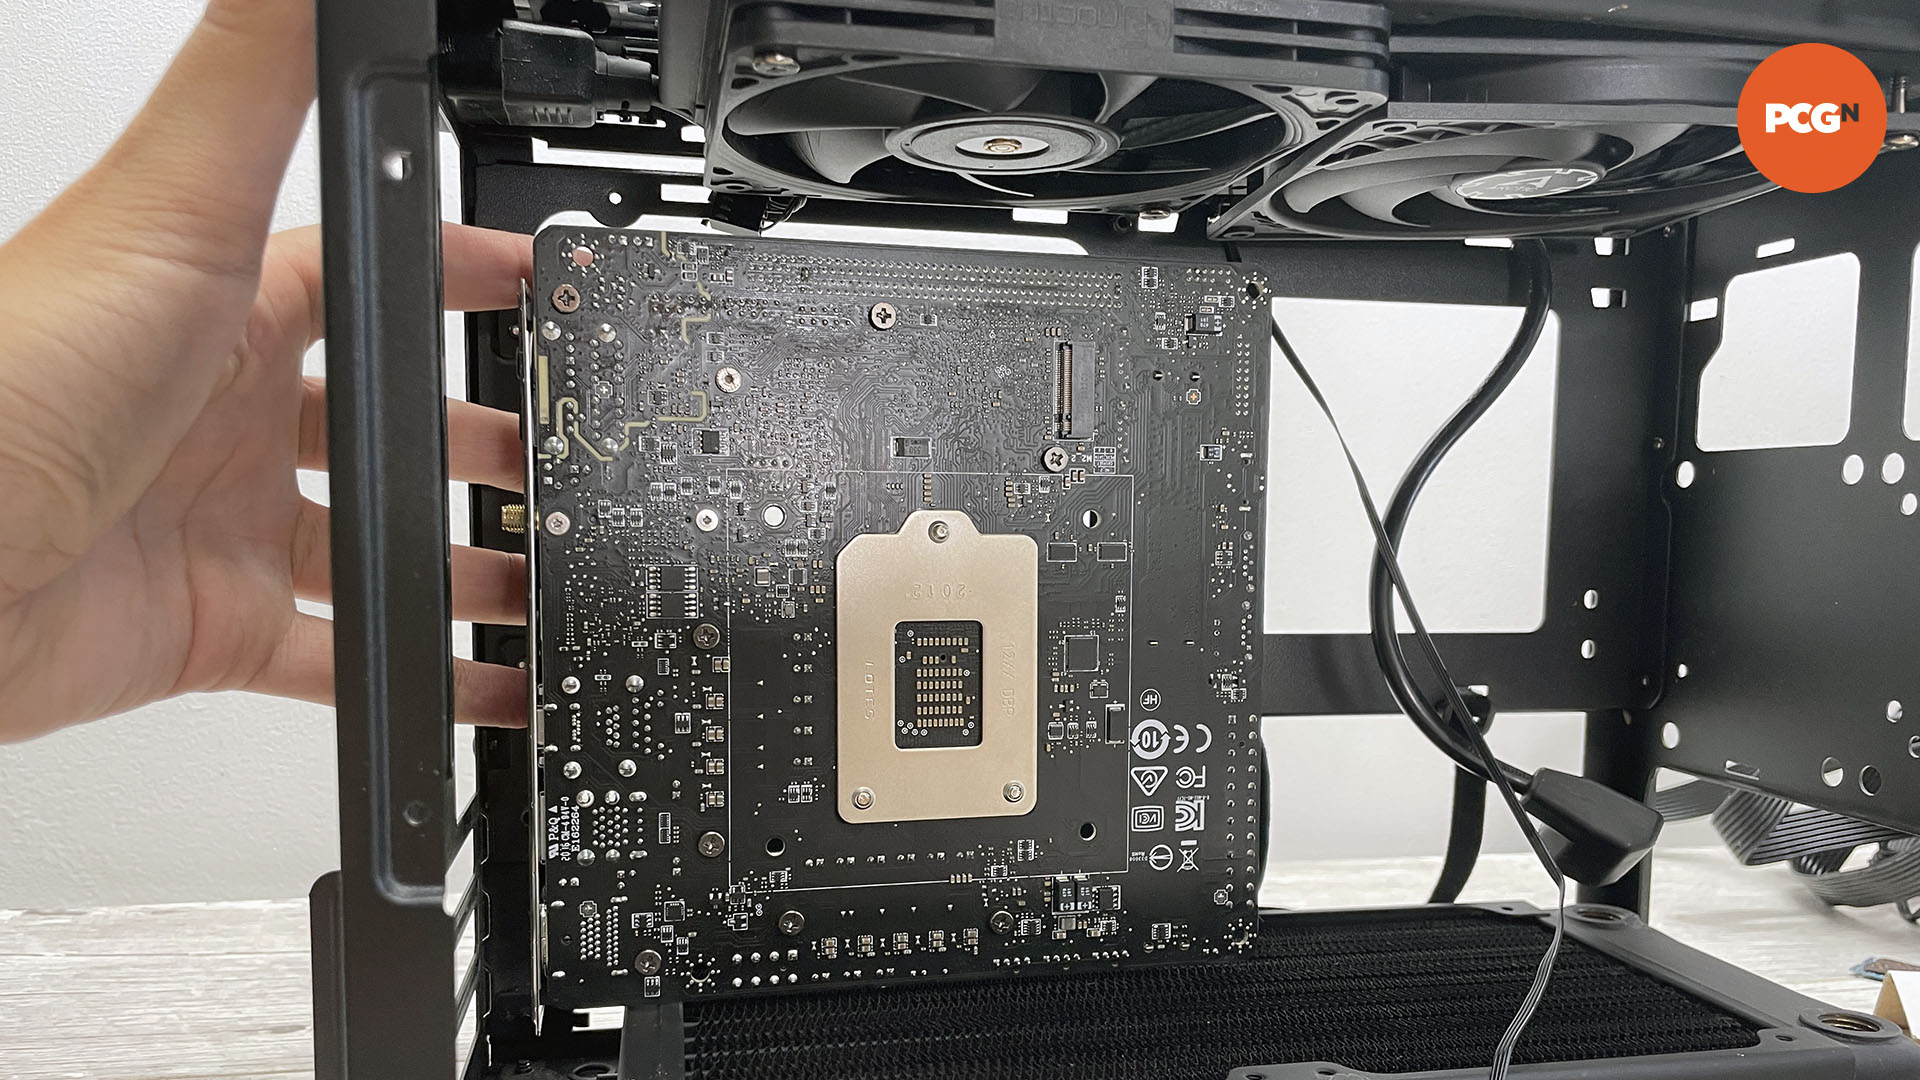 How to move the motherboard tray in your PC case: Test fit motherboard